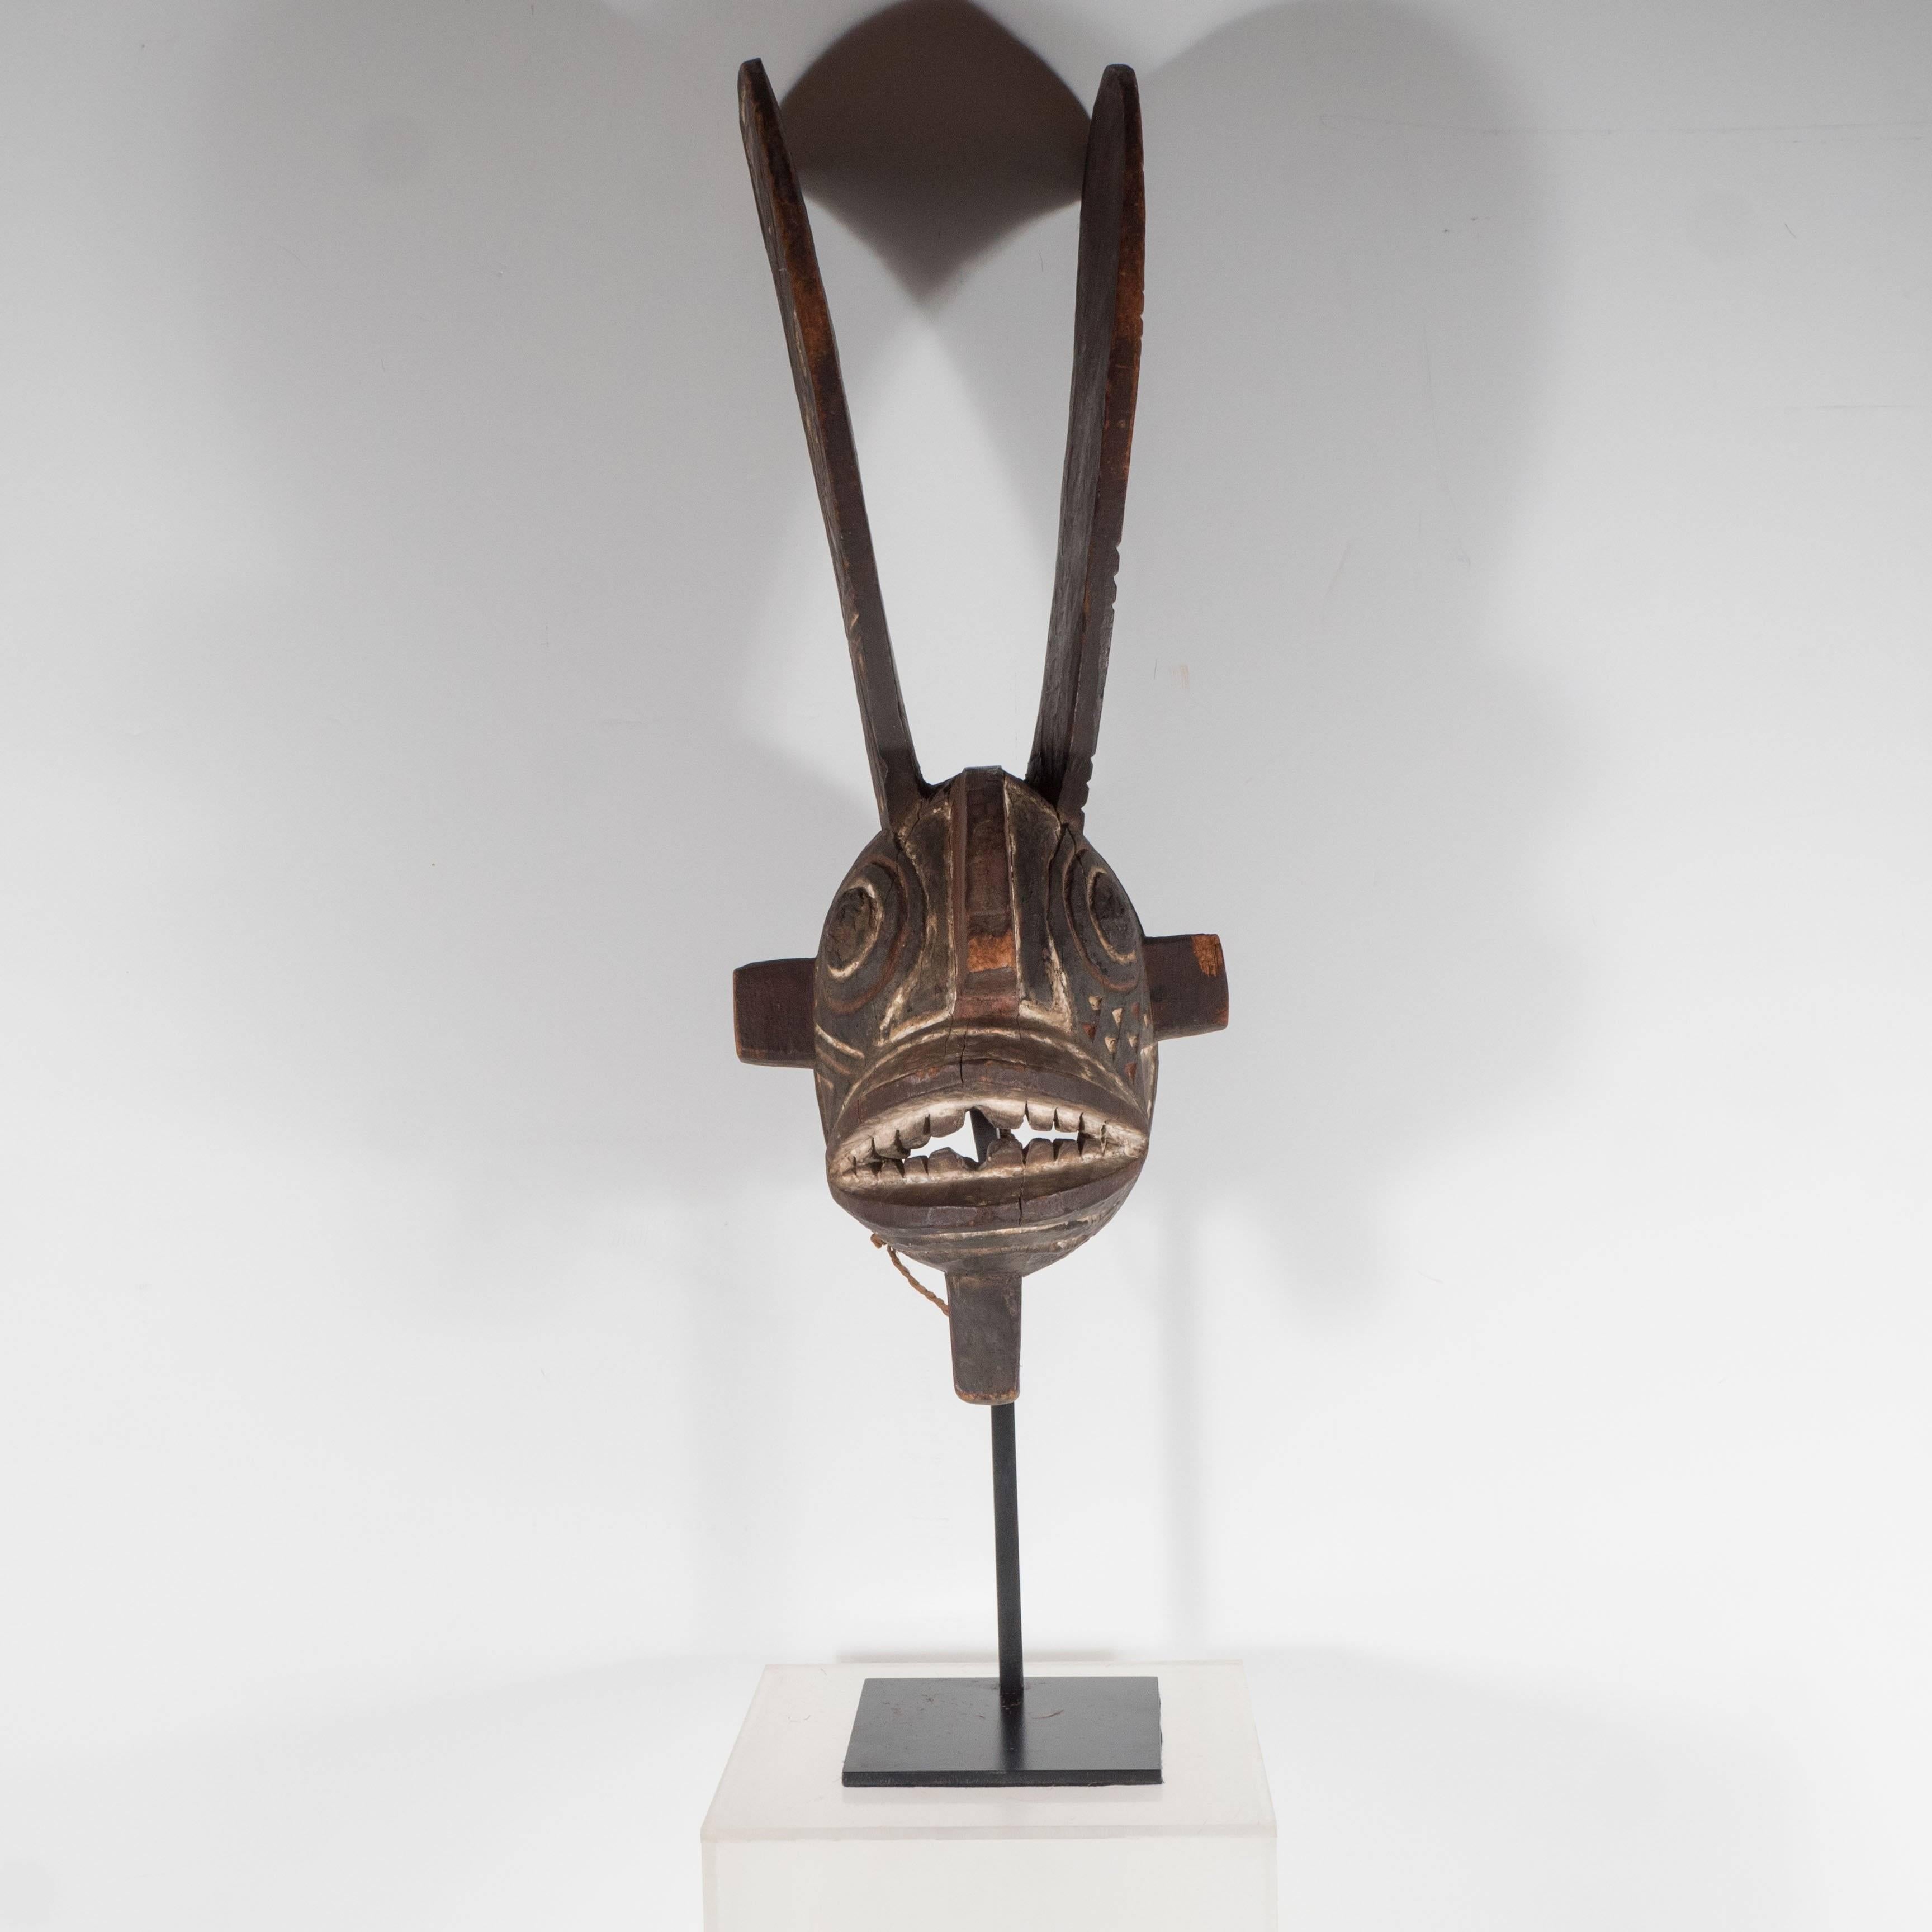 This compelling piece is a ceremonial mask worn by the Bwa peoples of Burkina Faso during funereal processions, coming of age initiation rituals, and seasonal agricultural festivities. It represents a particularly stunning example of African masks